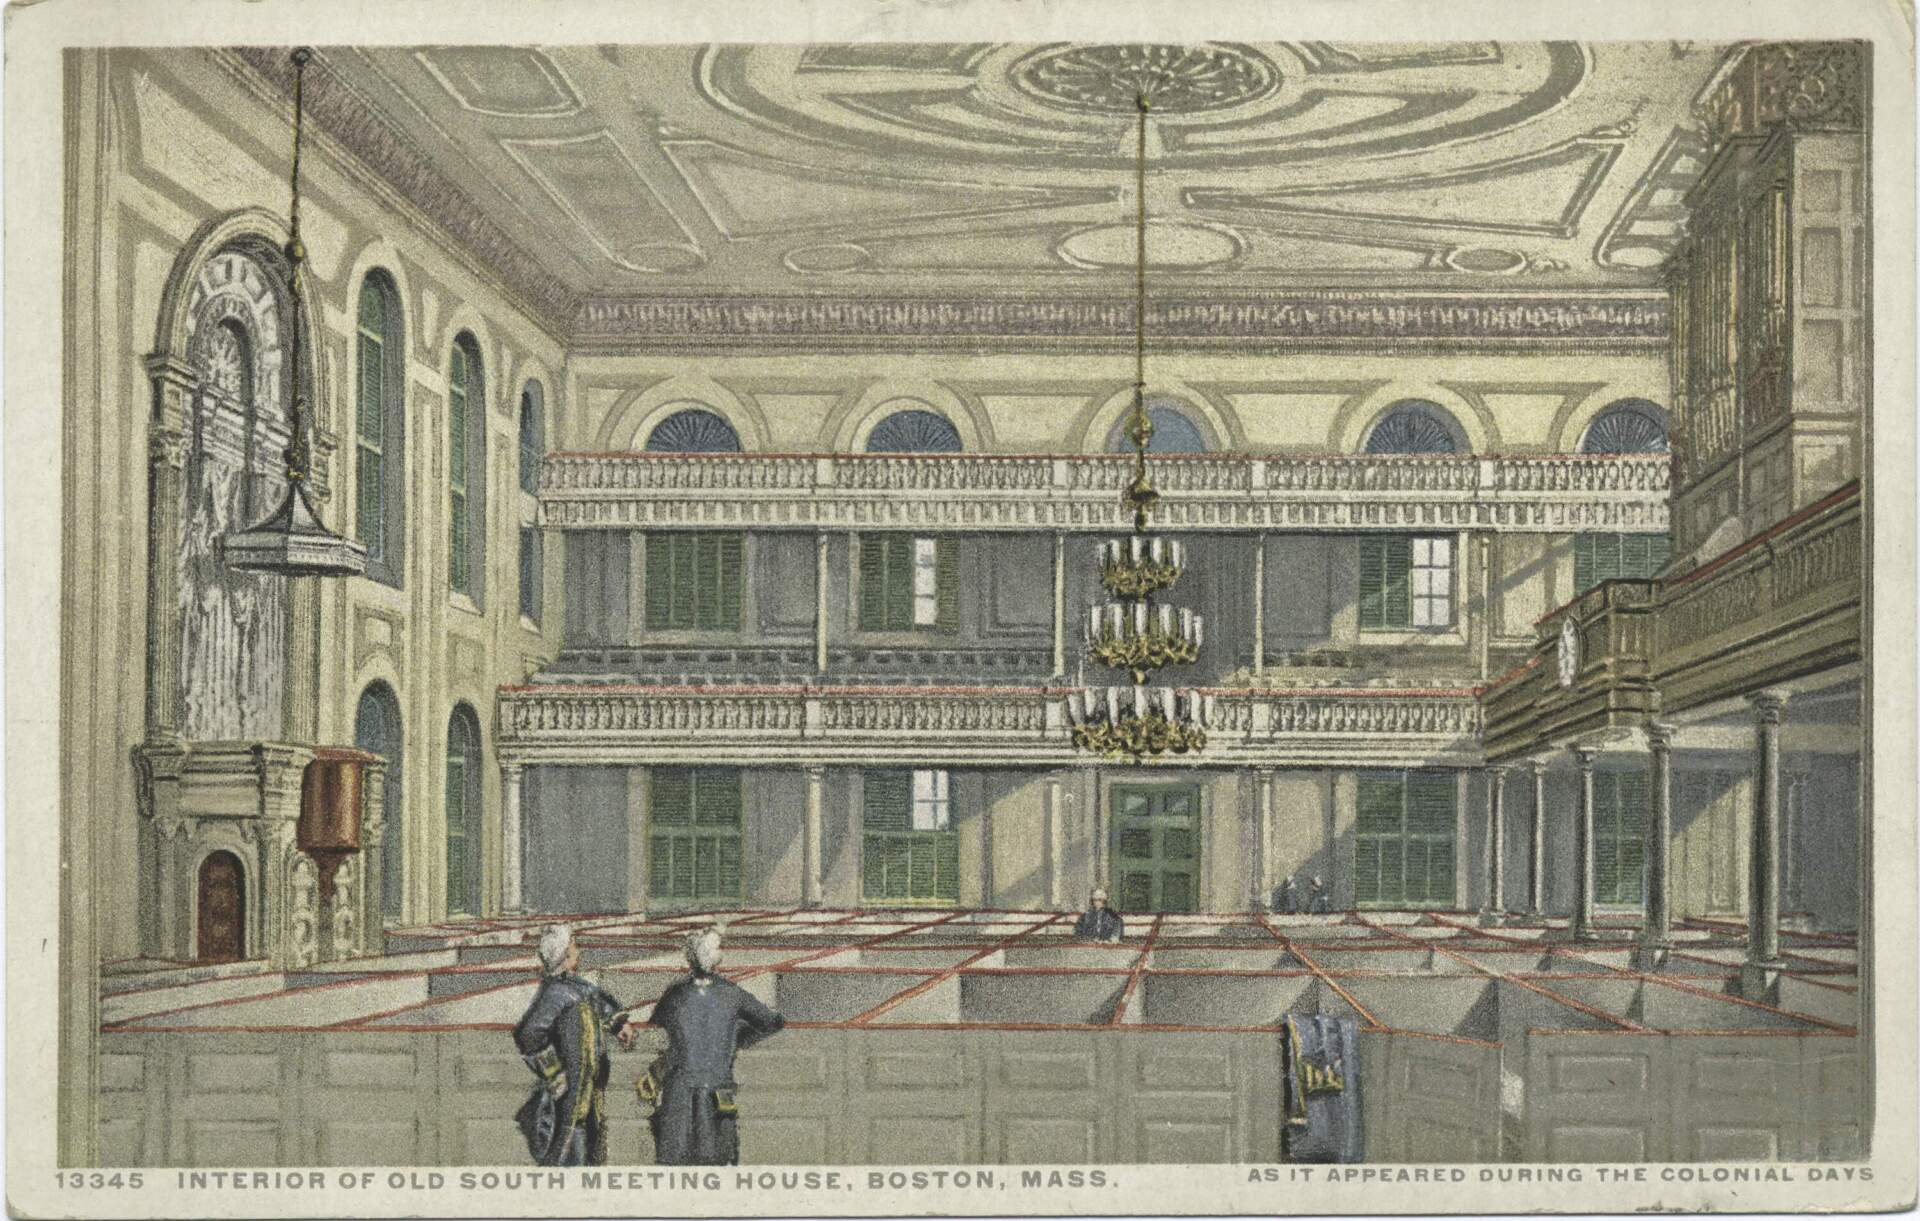 A late 19th century postcard illustration of the Old South Meeting House. (Getty Images)